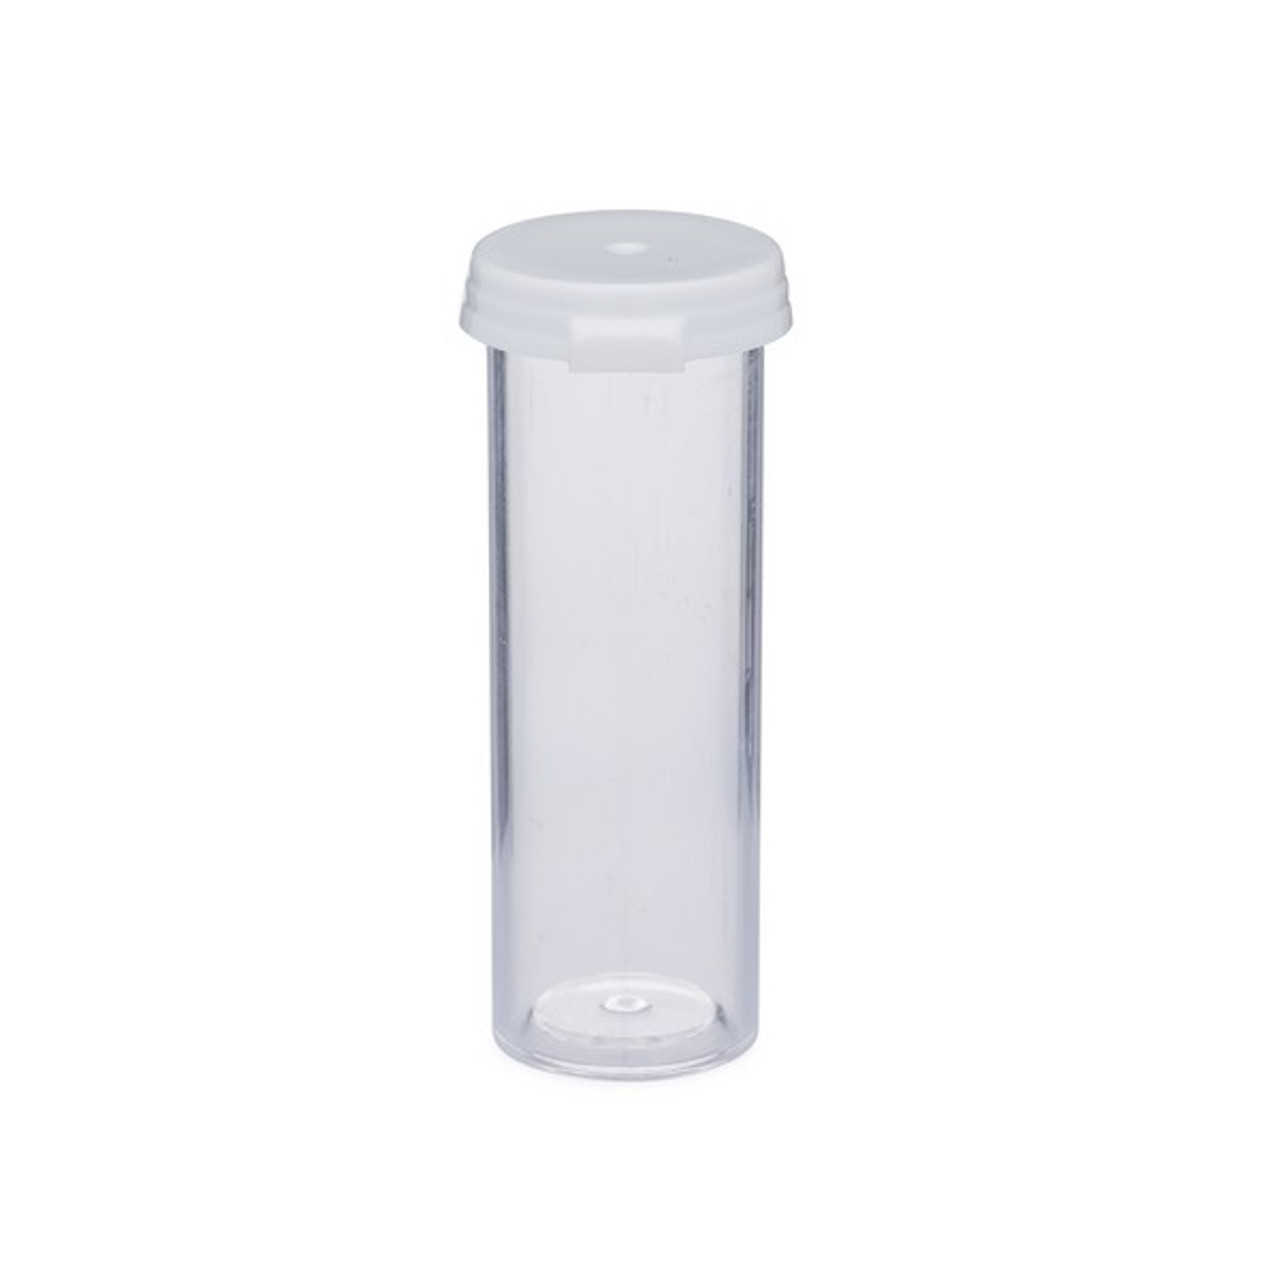 Vial, polystyrene and plastic, clear and white, 1-1/2 x 1-inch small vial  with snap on cap. Sold per pkg of 6. - Fire Mountain Gems and Beads